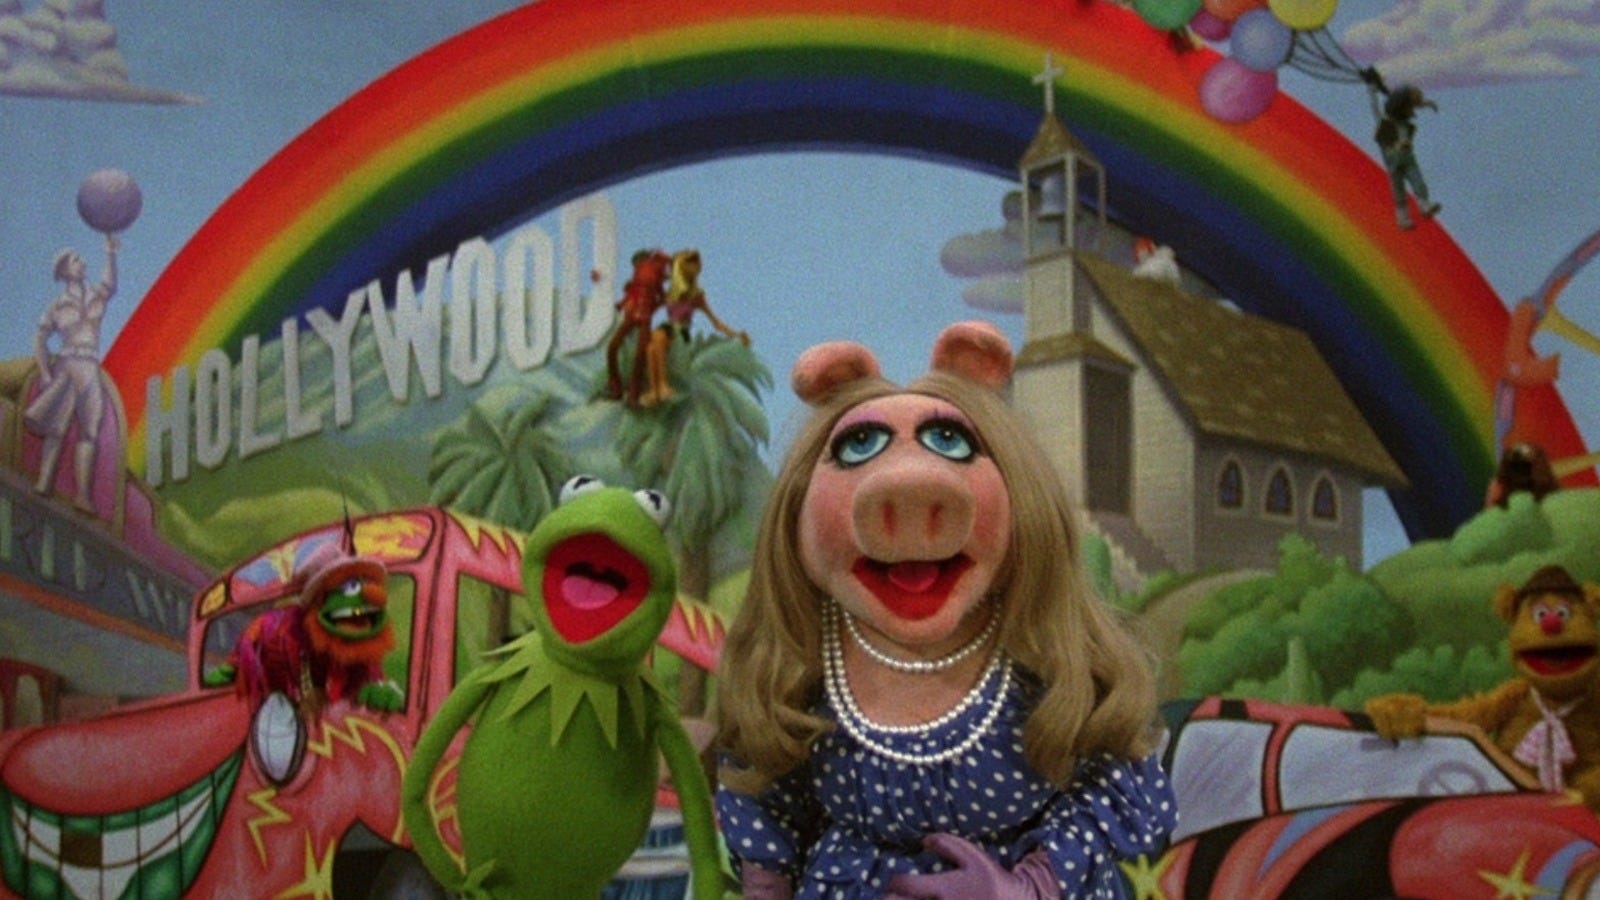 Muppets Now Episode 5 Review: The I.T. Factor